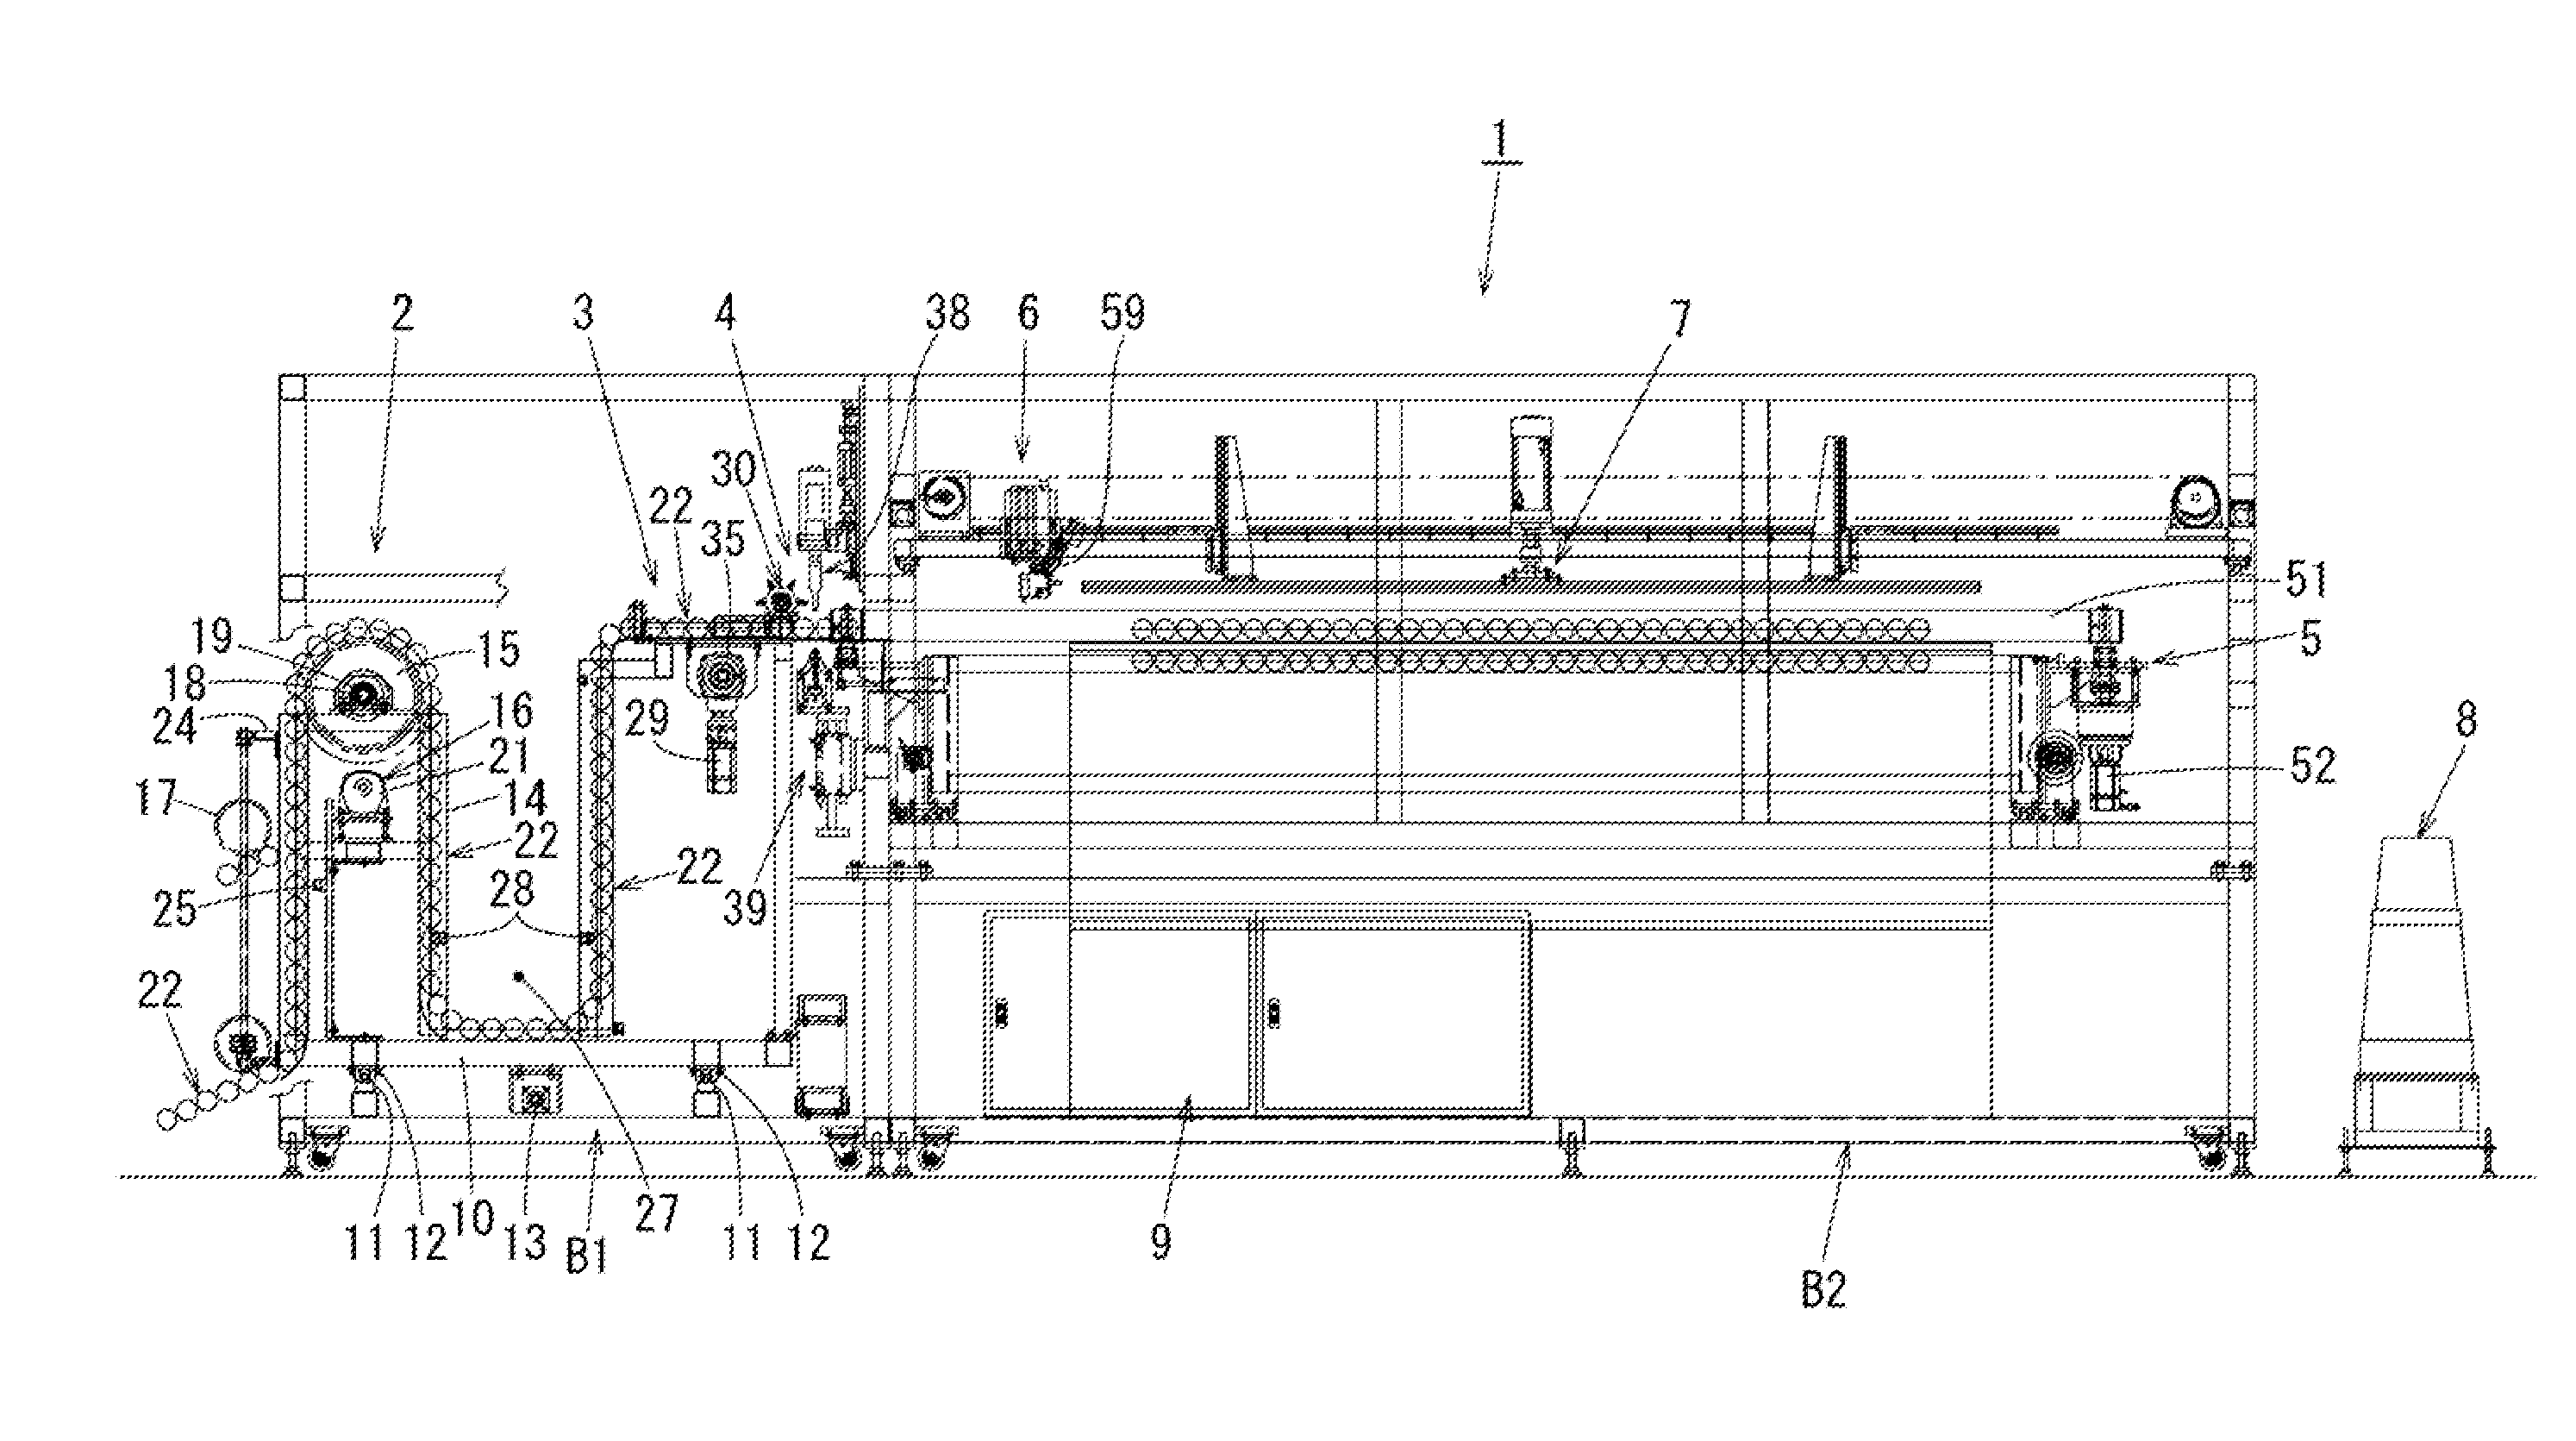 Pocket coil spring structure assembling apparatus